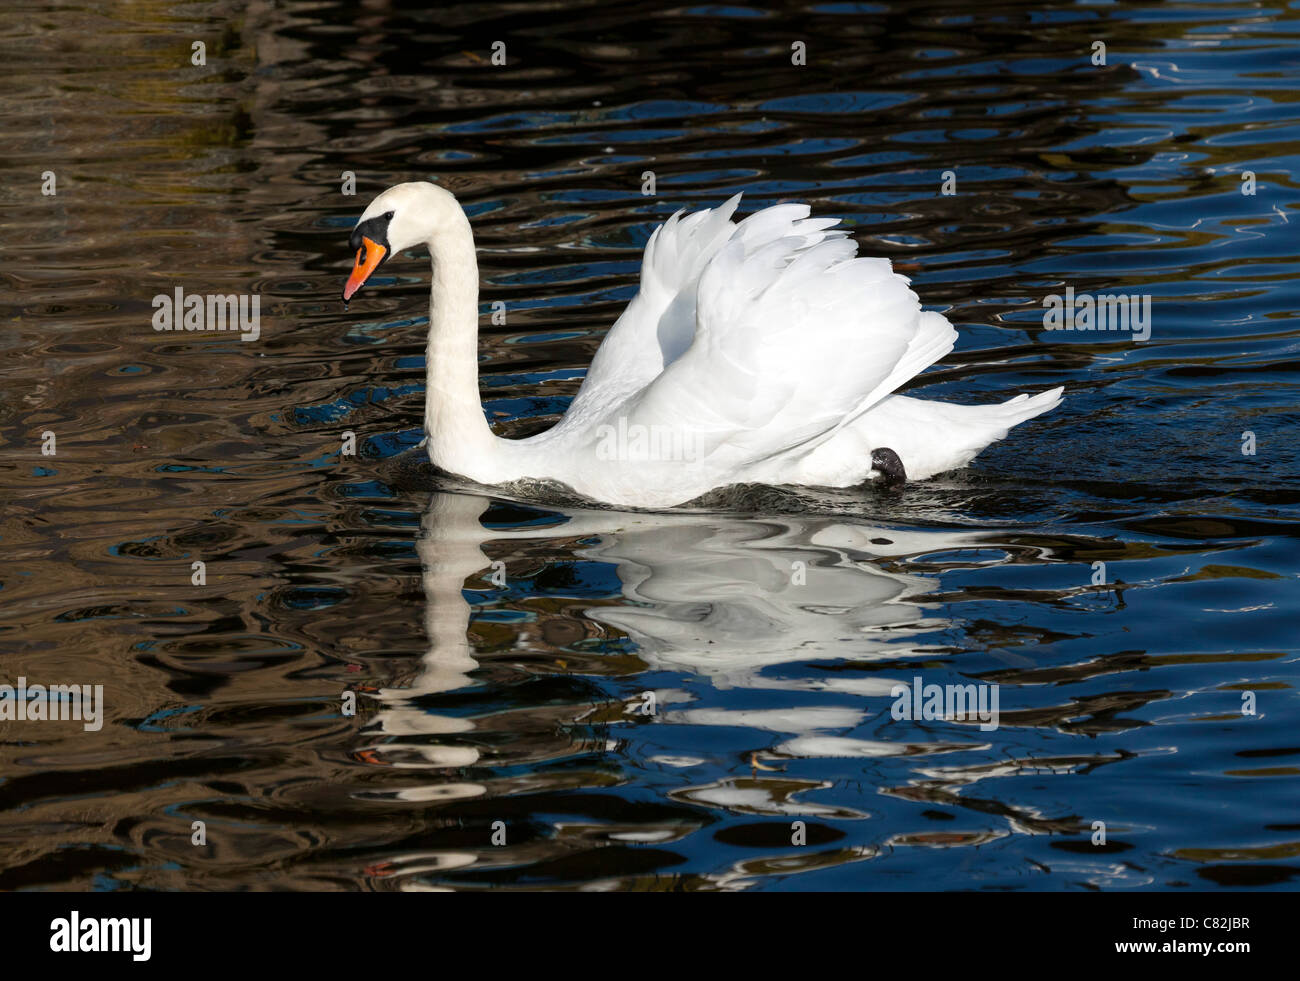 swan on the Great Ouse river at Ely, UK Stock Photo